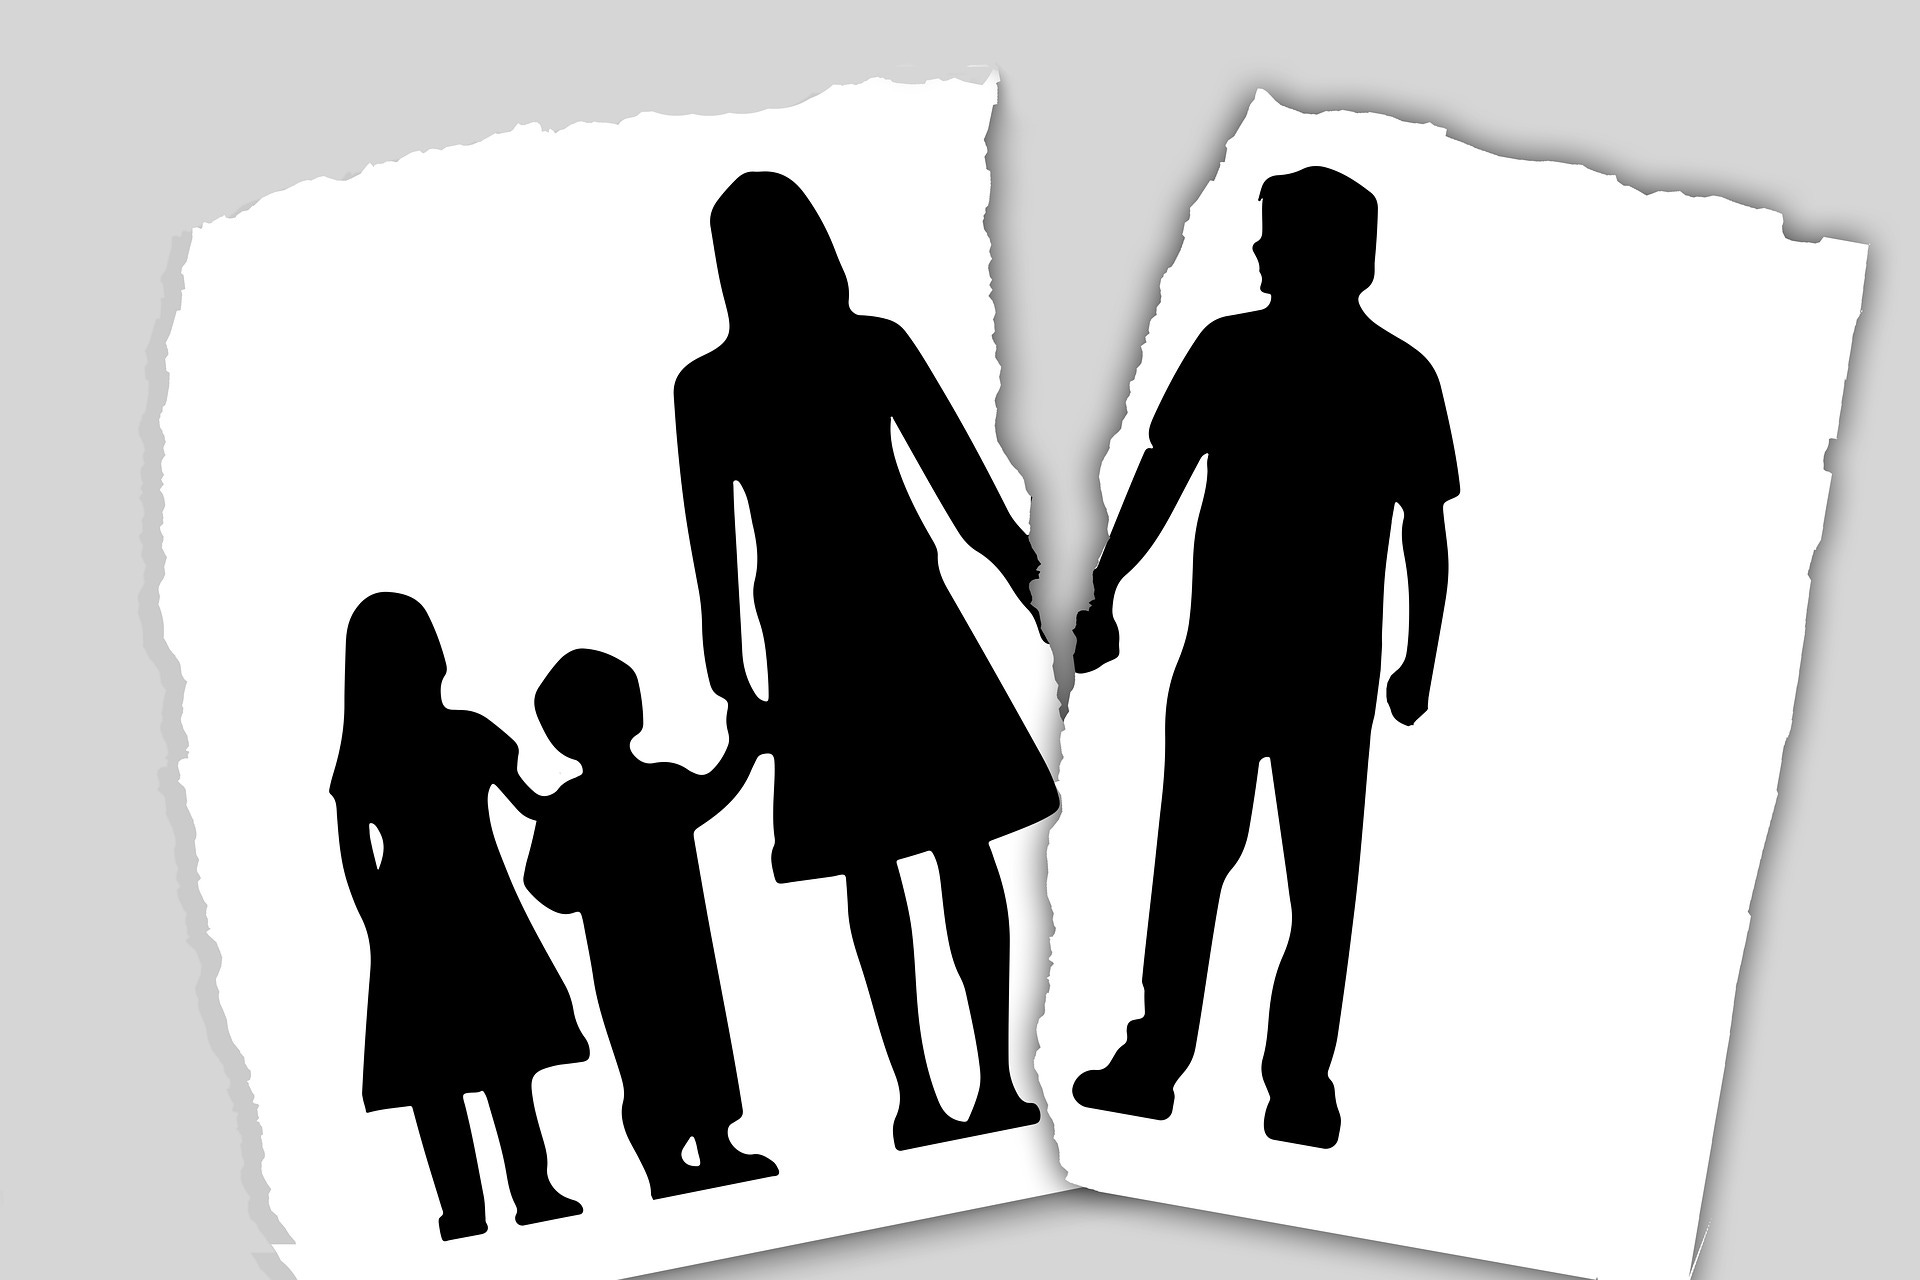 A silhouette of a family on a piece of paper with the husband torn away from the wife and children